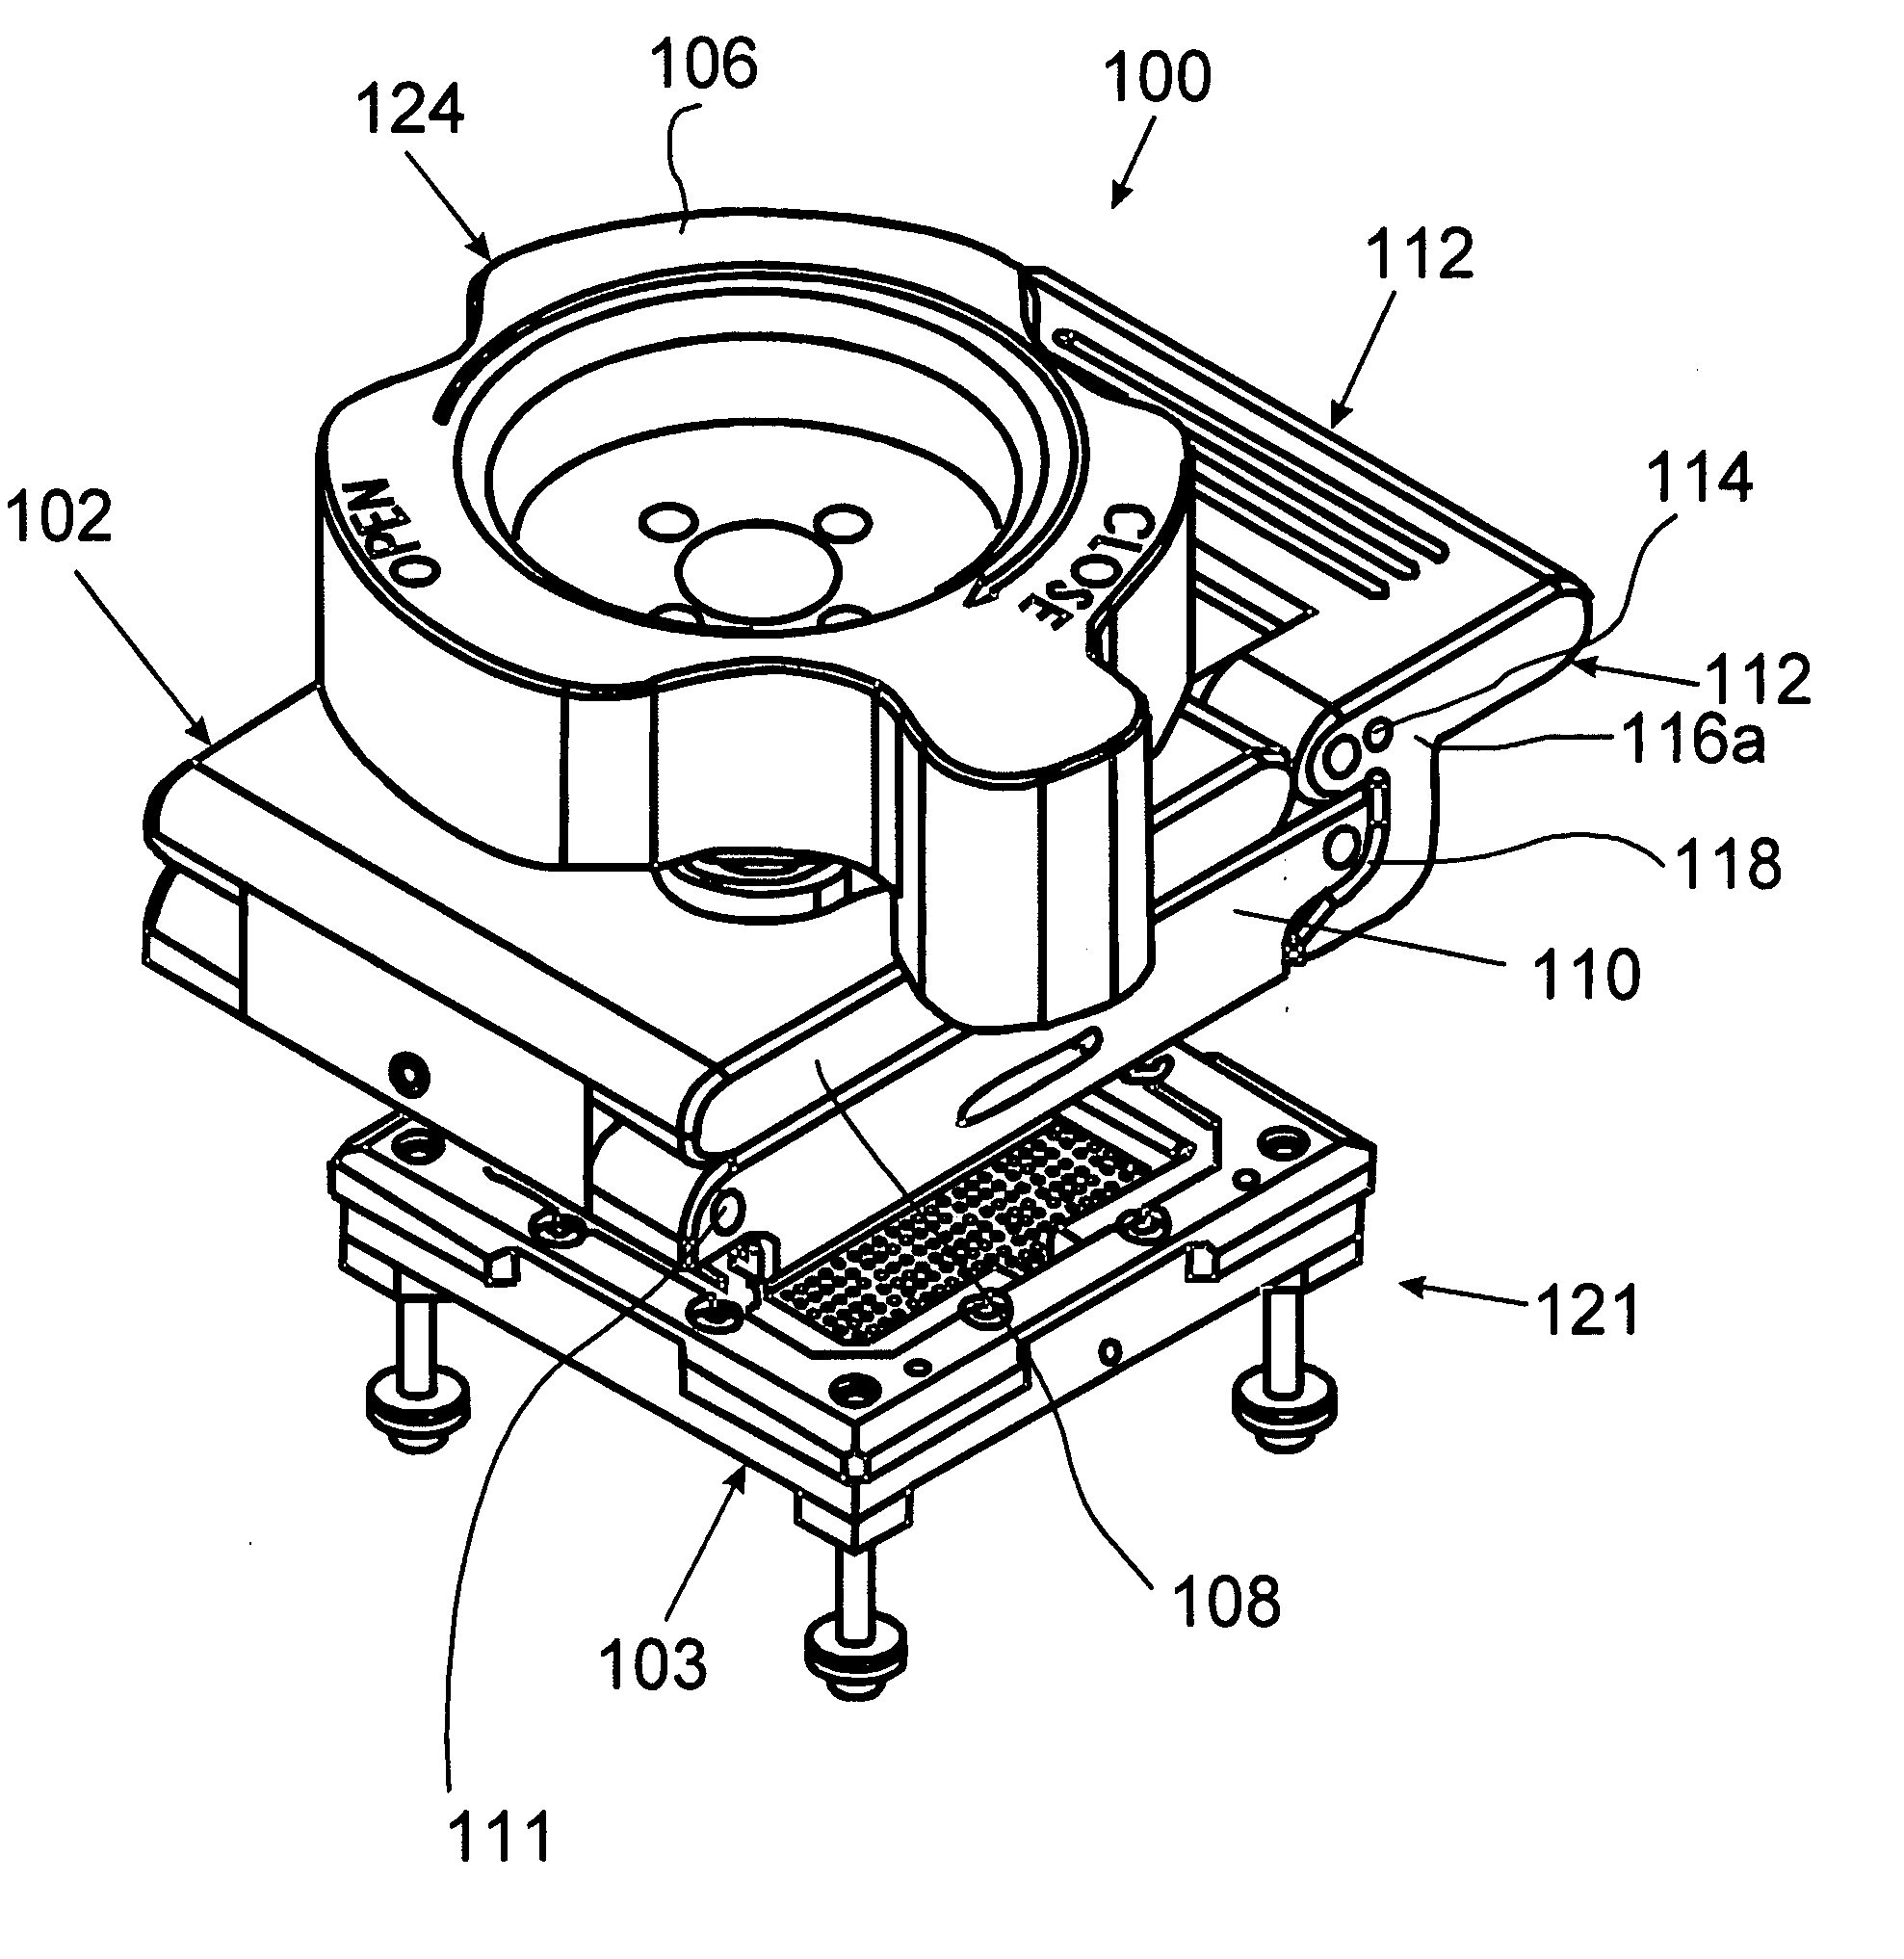 Object-clamping lid subassembly of a test socket for testing electrical characteristics of an object